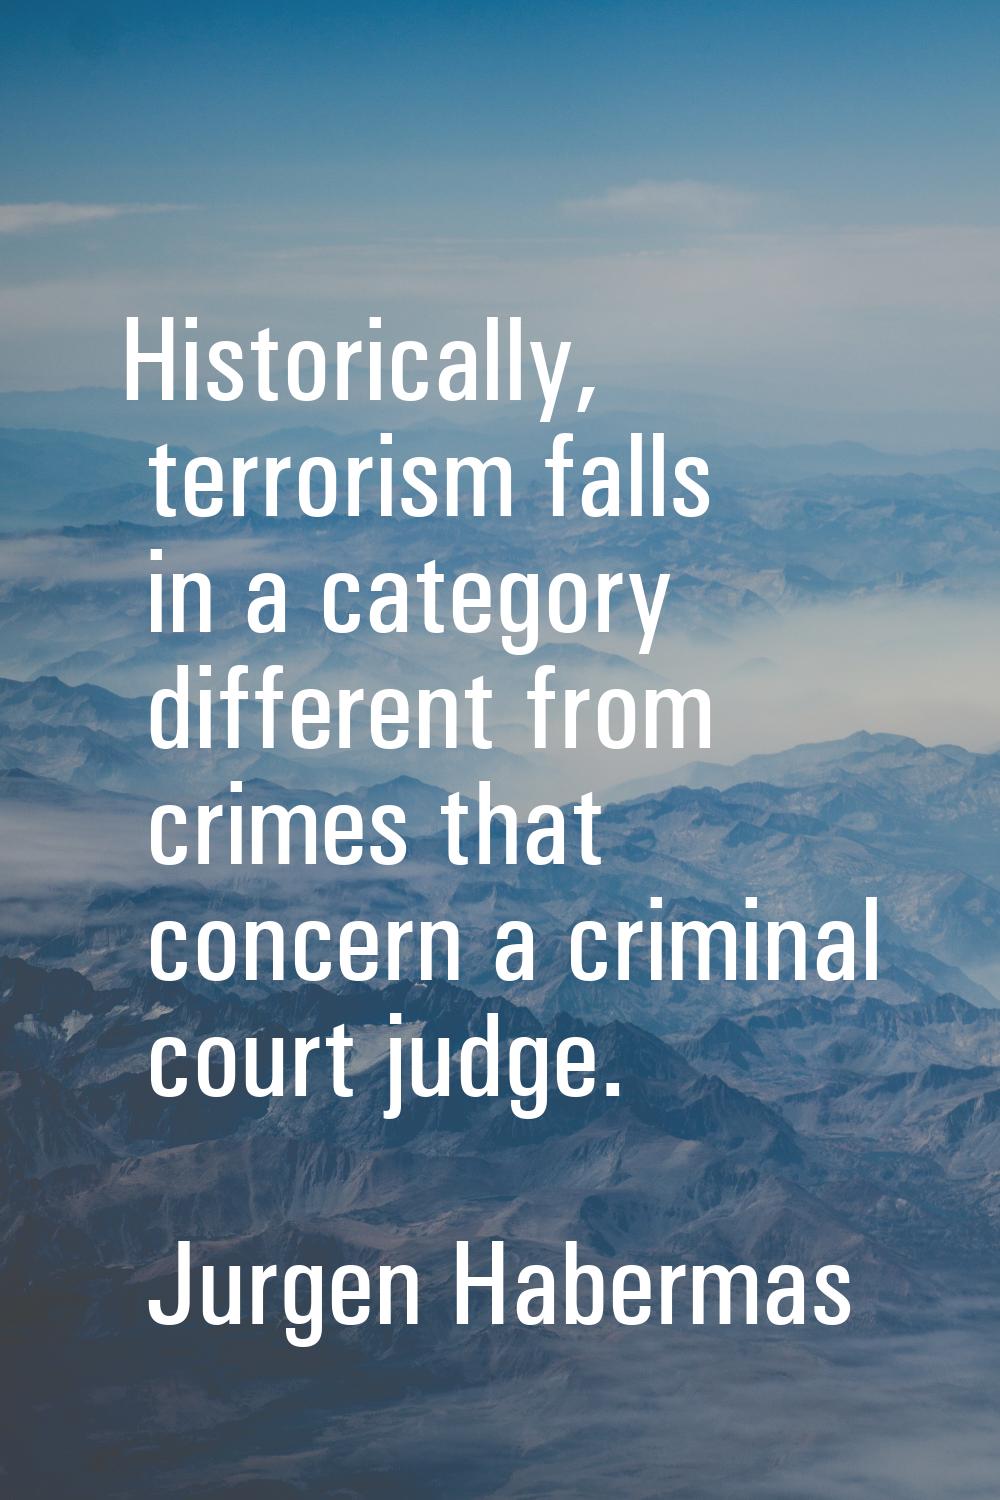 Historically, terrorism falls in a category different from crimes that concern a criminal court jud